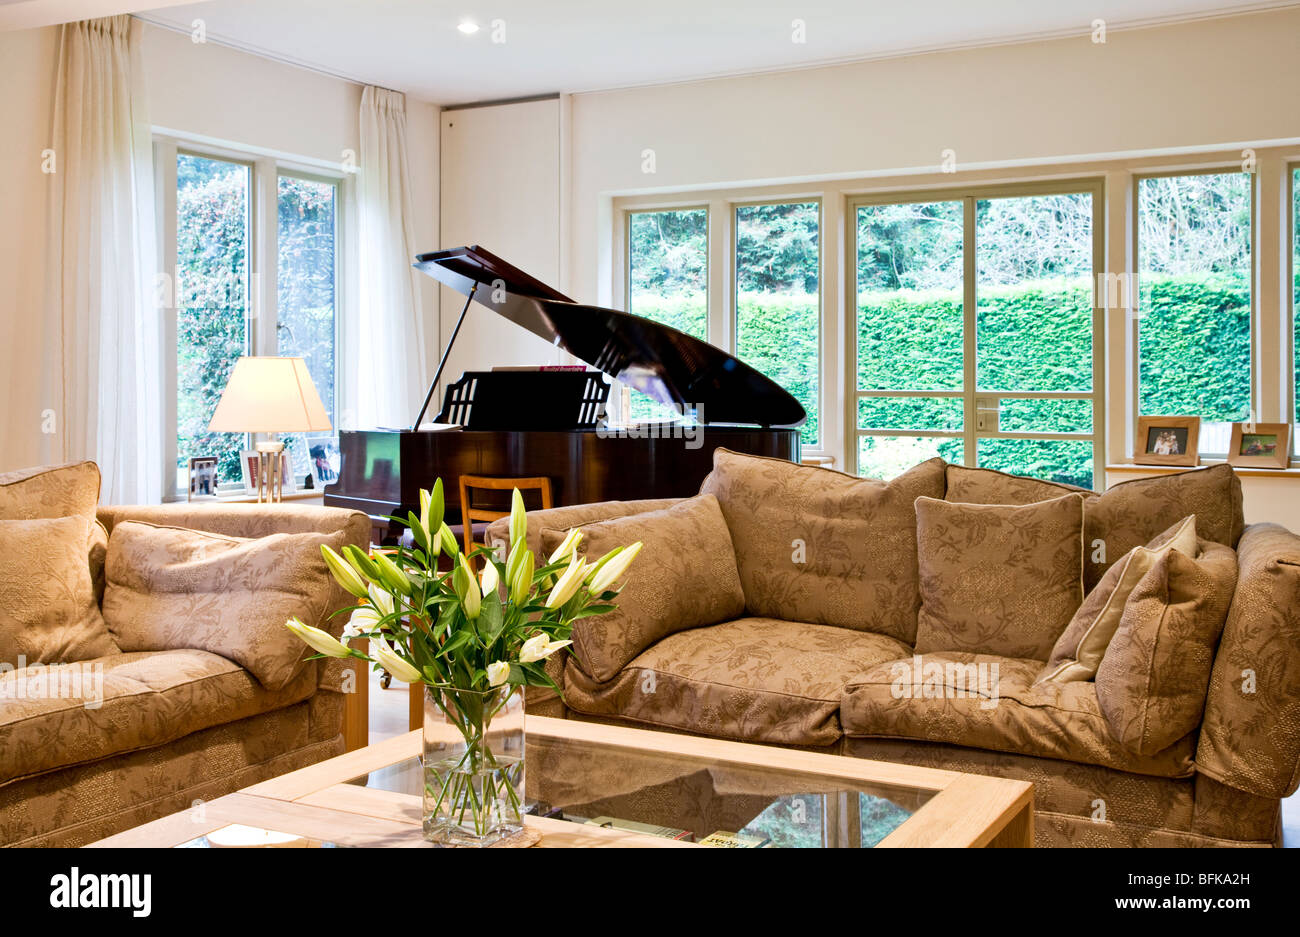 A stylish smart modern lounge, living or sitting room with a baby grand piano and vase of white lilies Stock Photo